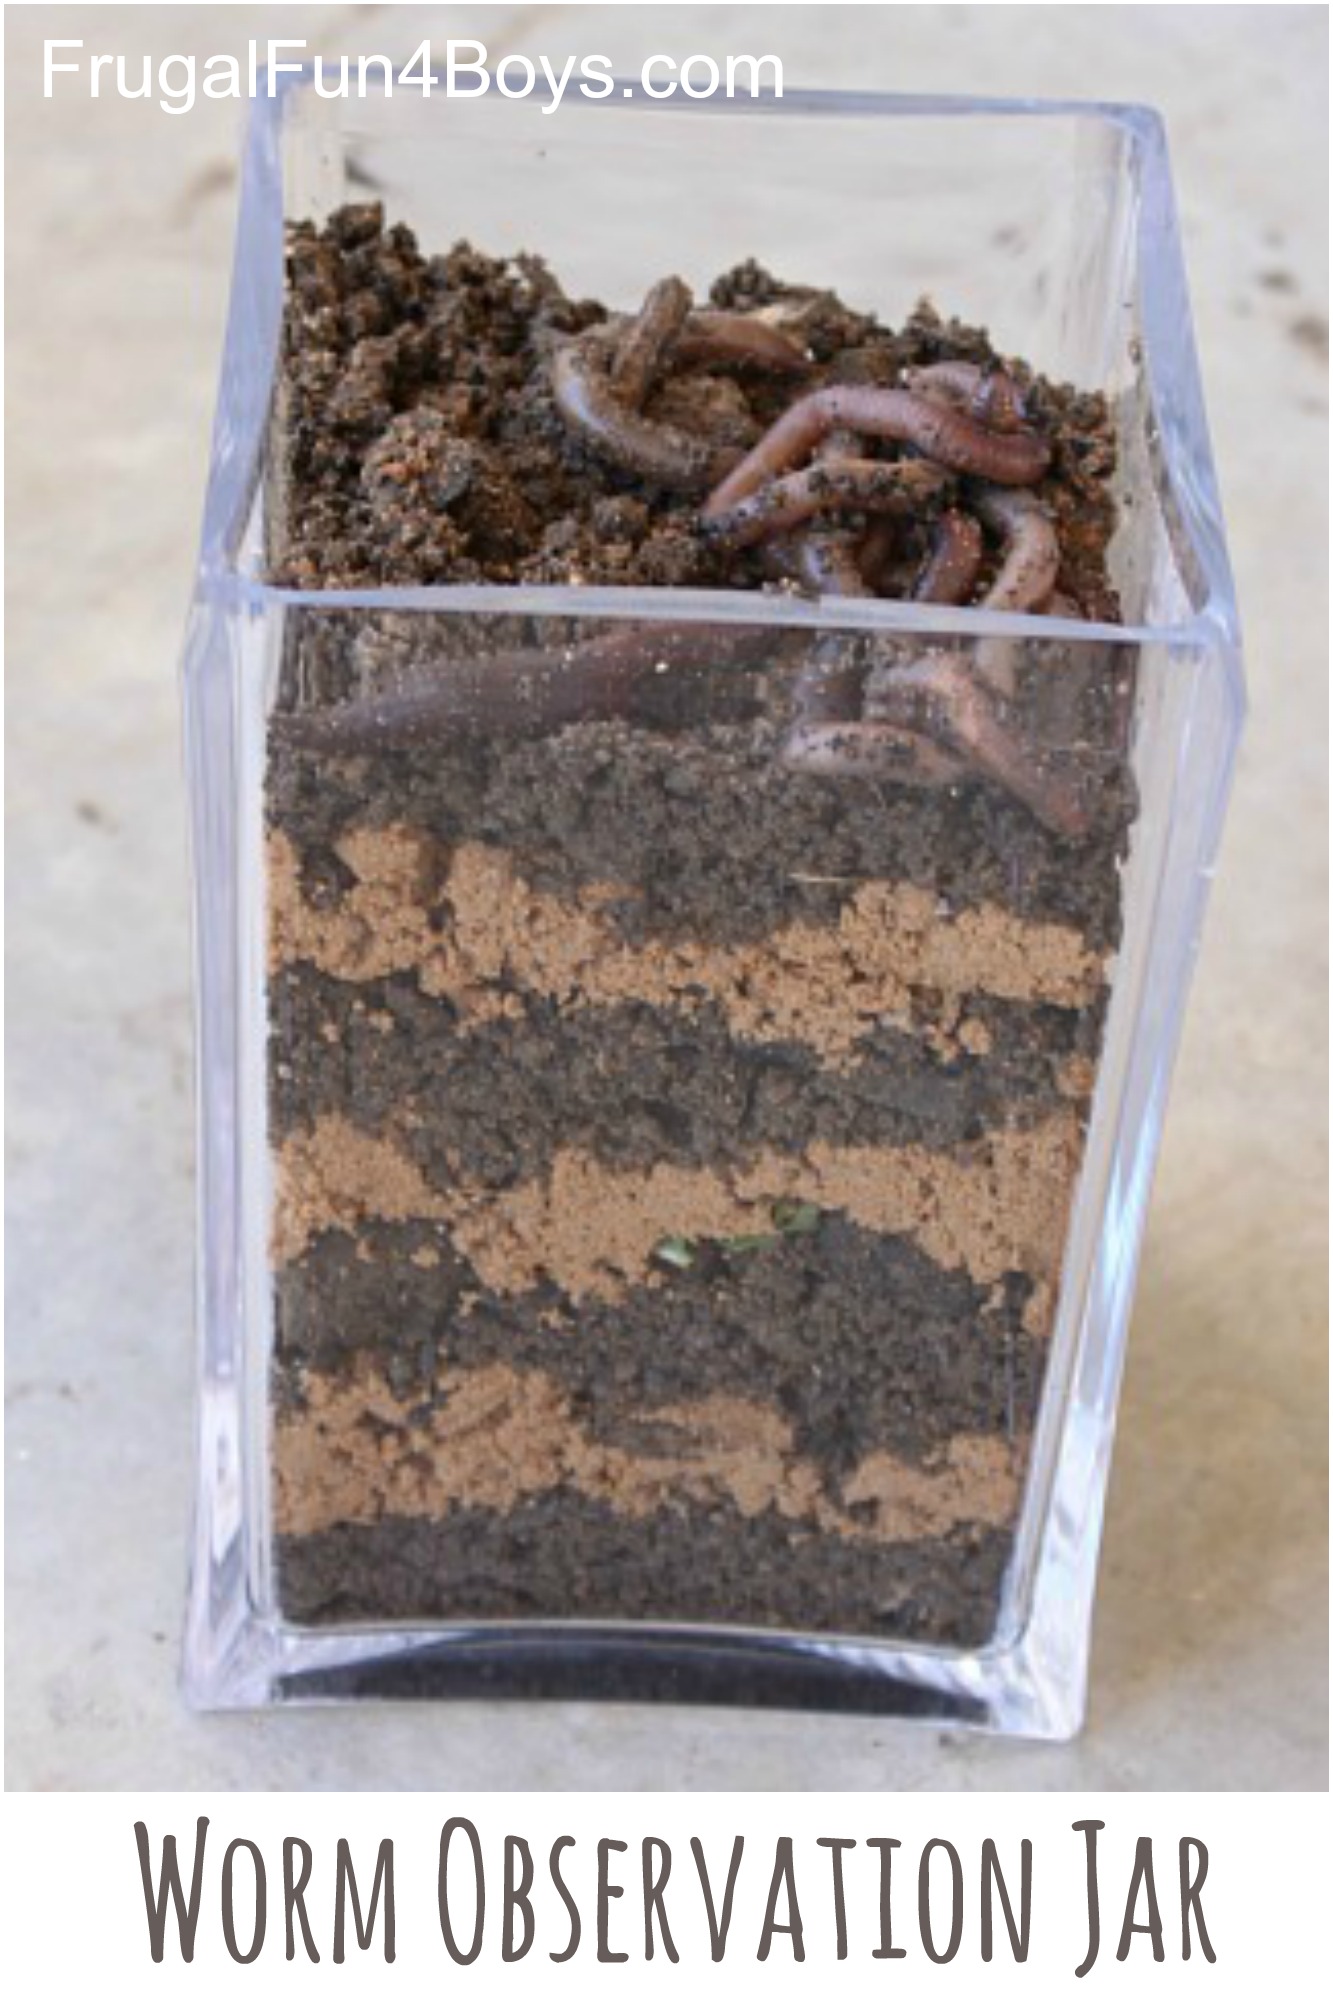 Make a Worm Observation Jar - This is a great way to learn about what worms do for the earth!